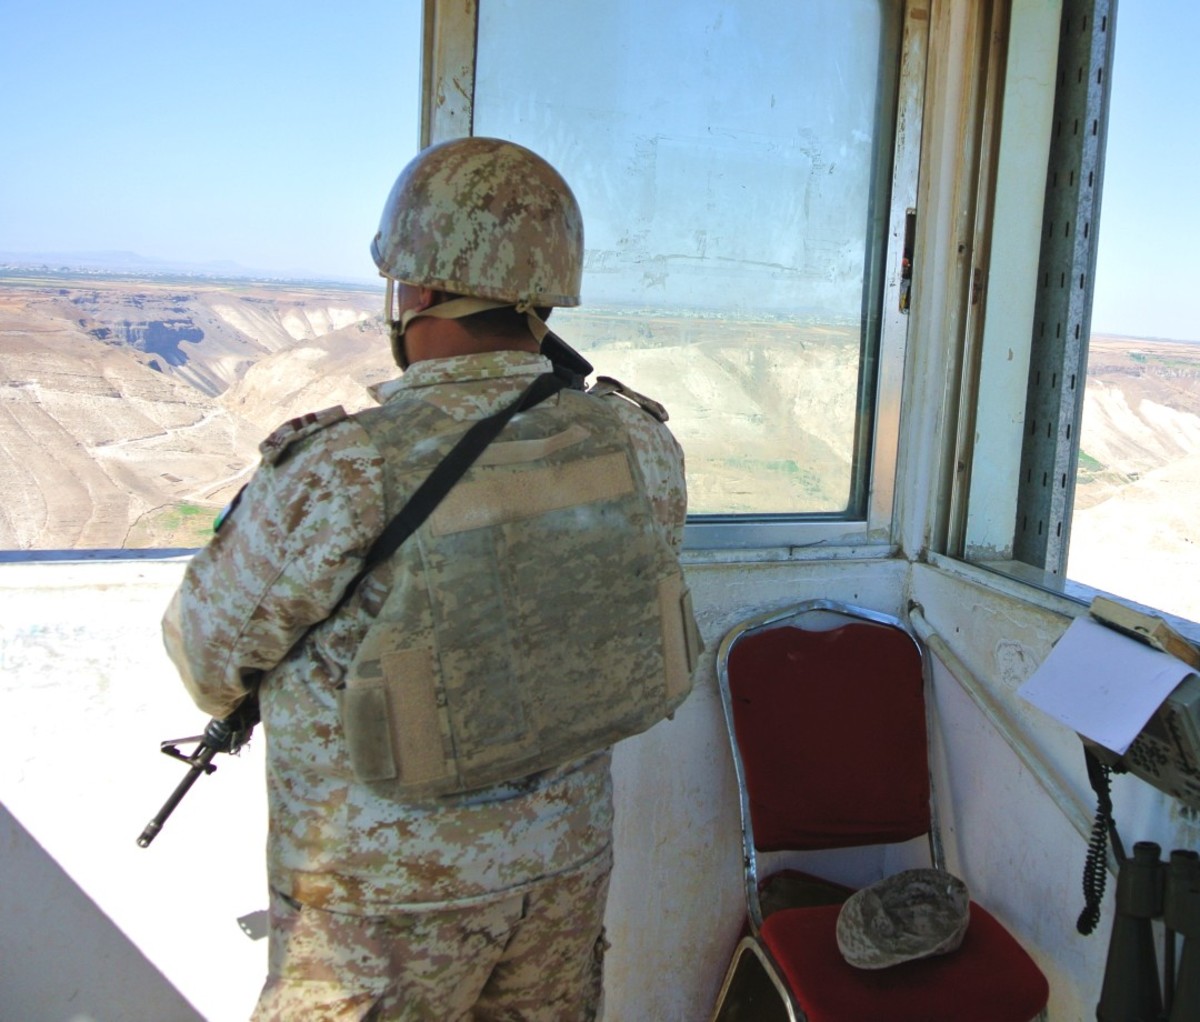 A JAF border sentry guards the frontier at his post